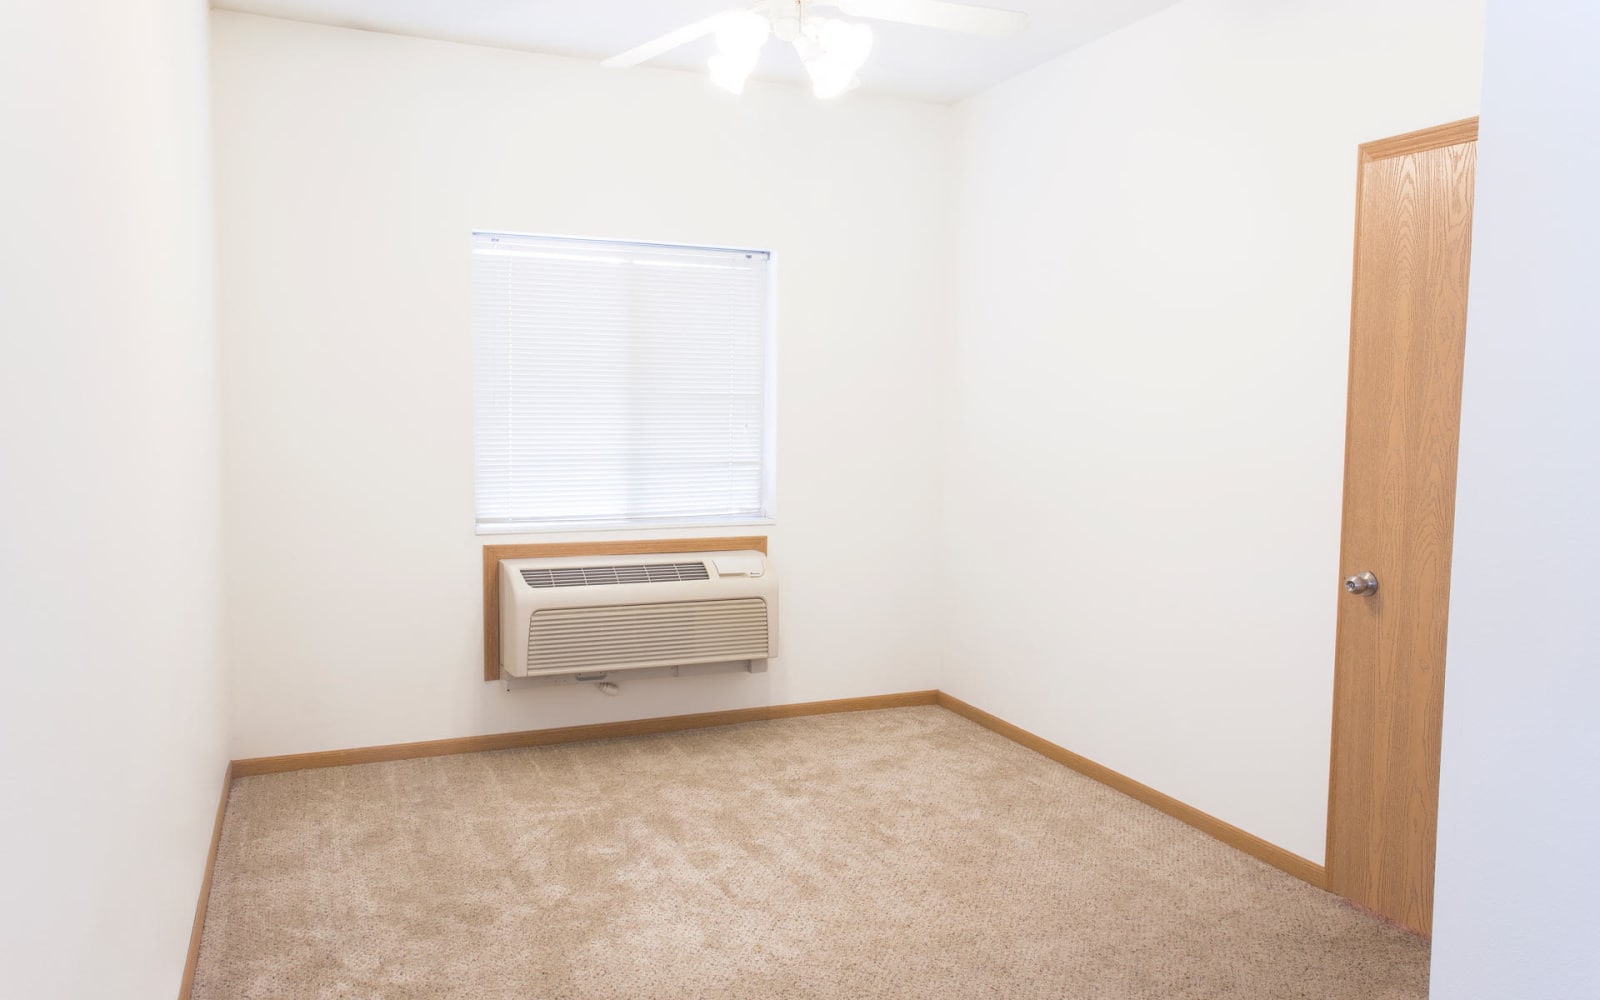 Bedroom with an air conditioning unit at Westwood Village in Ames, Iowa